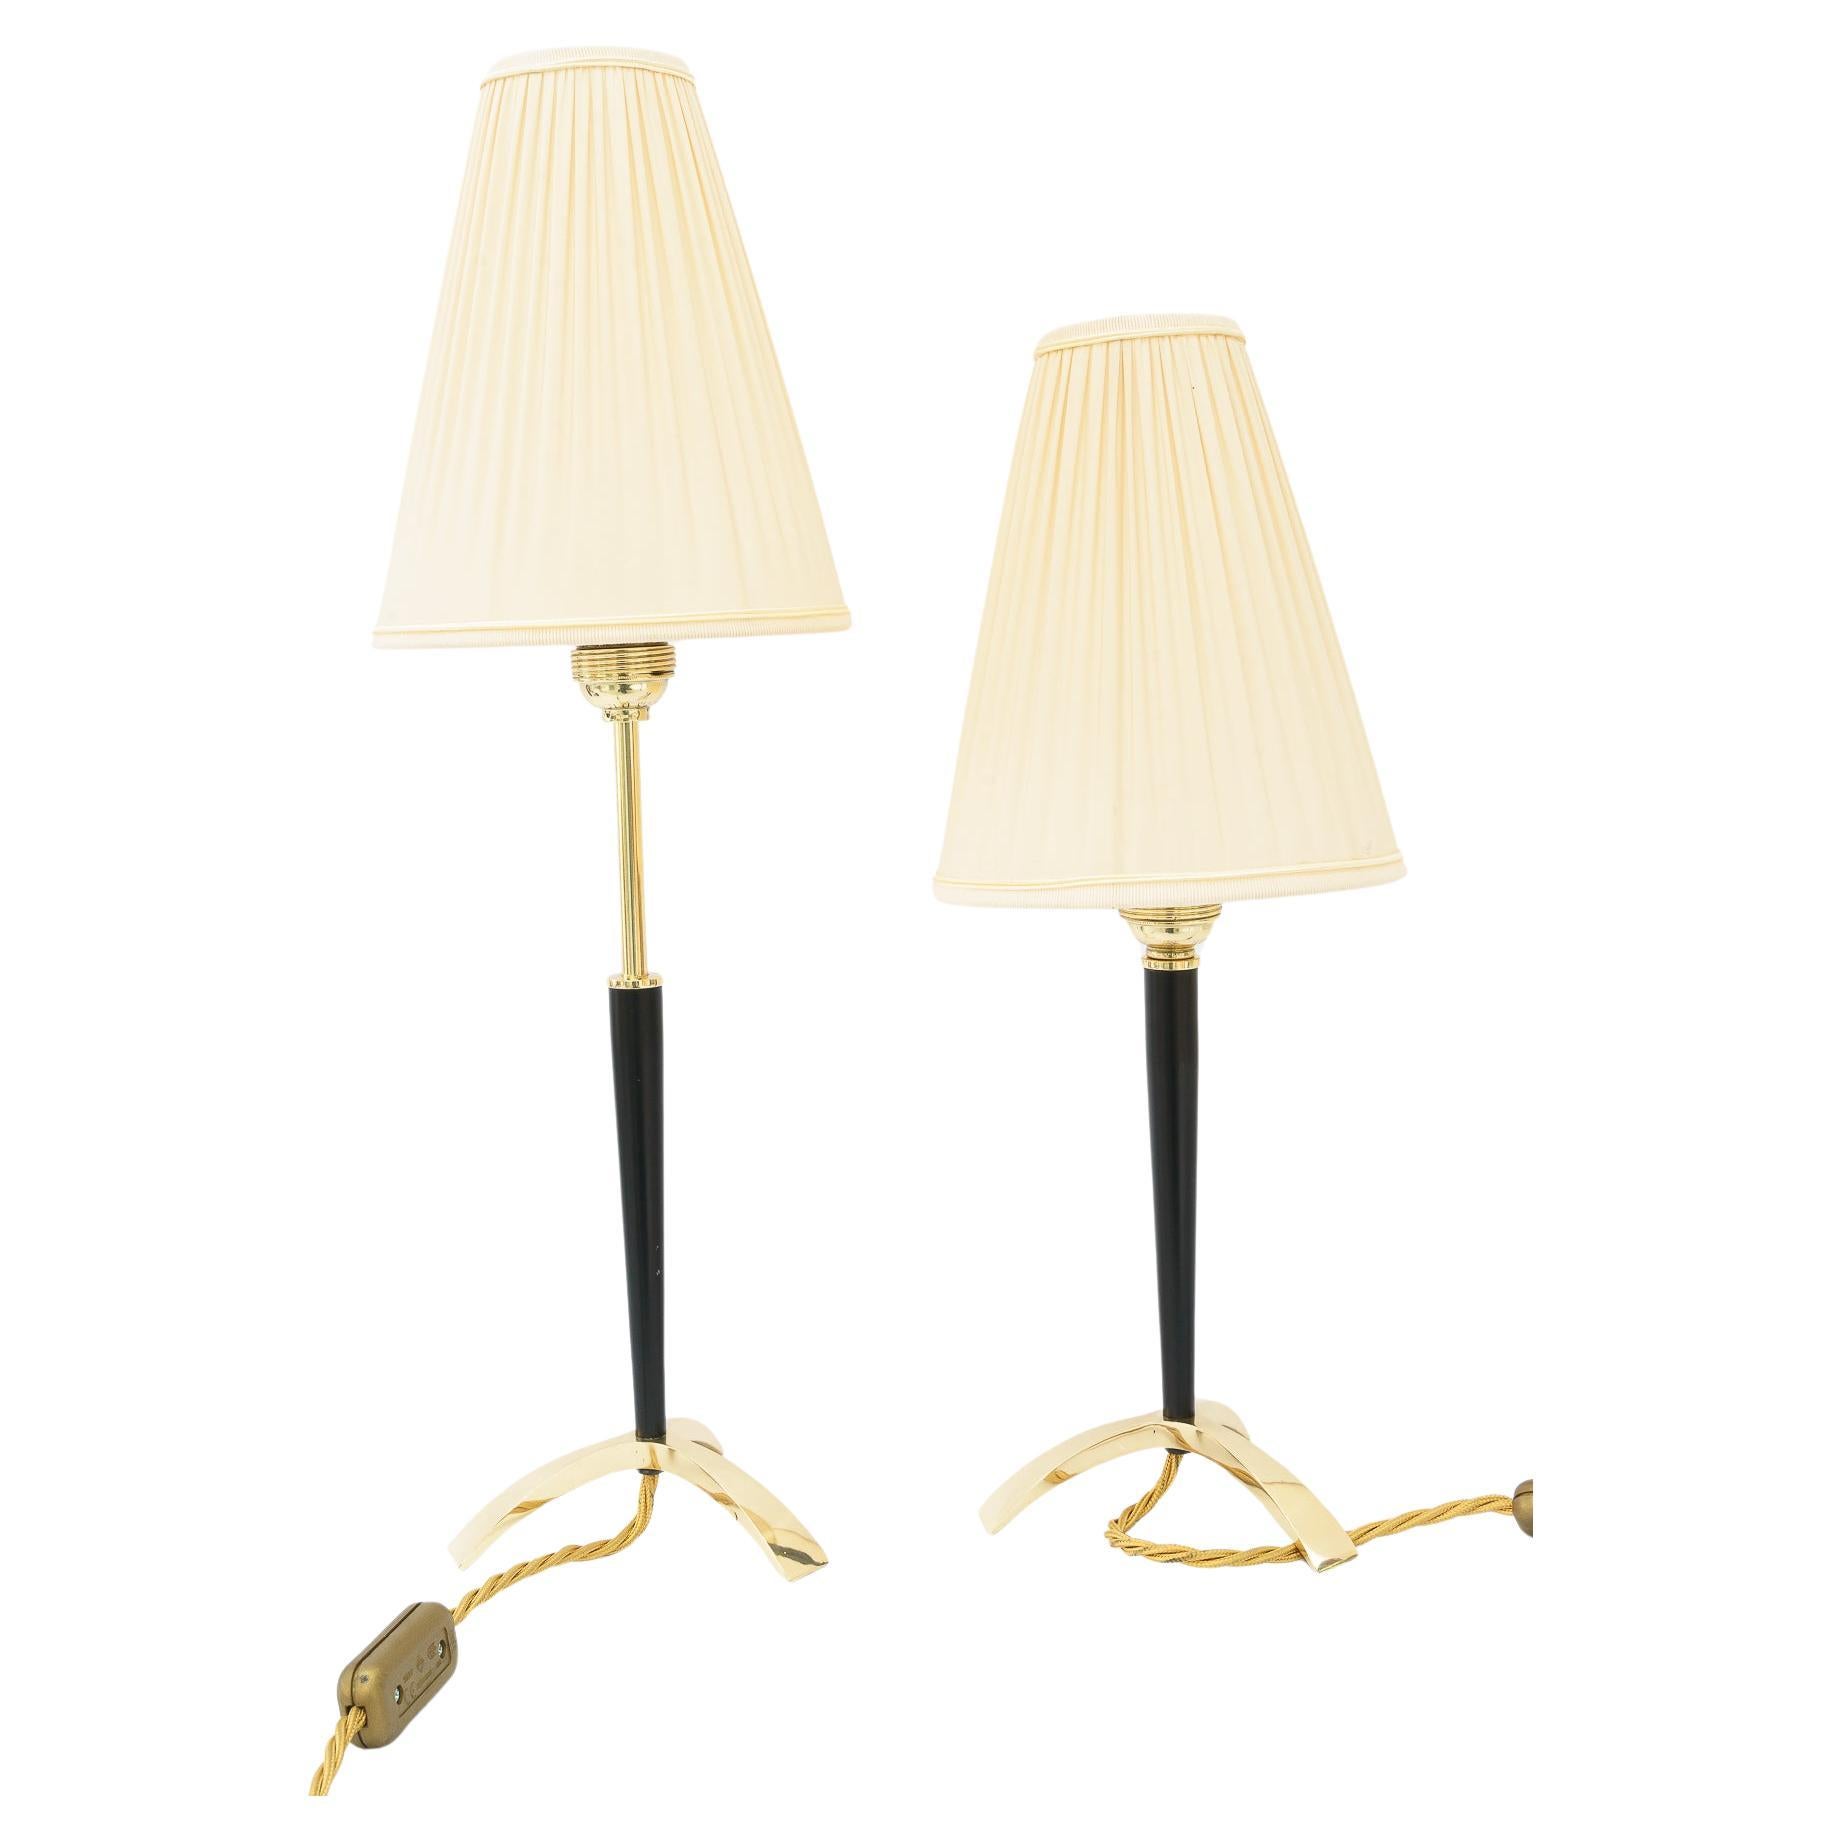  Two Extendable Table Lamps by J.T. Kalmar, circa 1950s For Sale